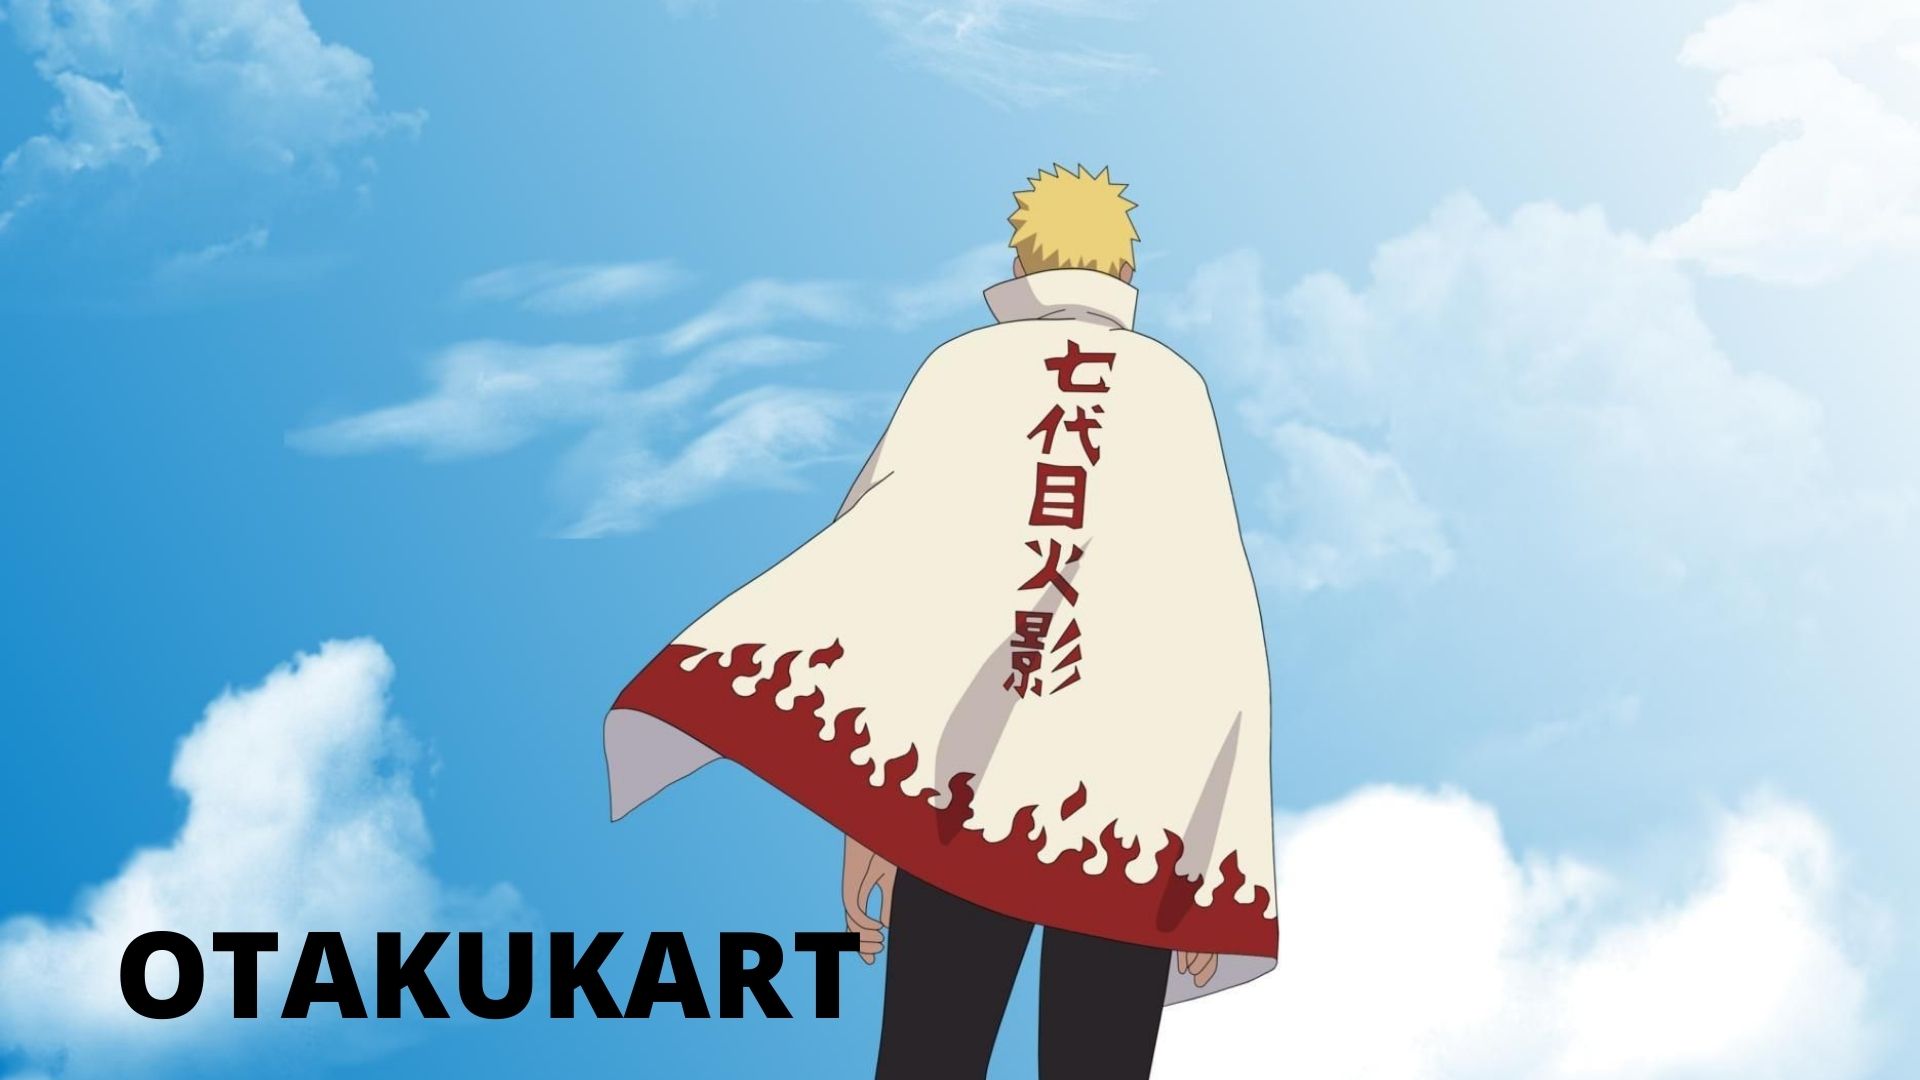 How Old Was Naruto When He Became Hokage?